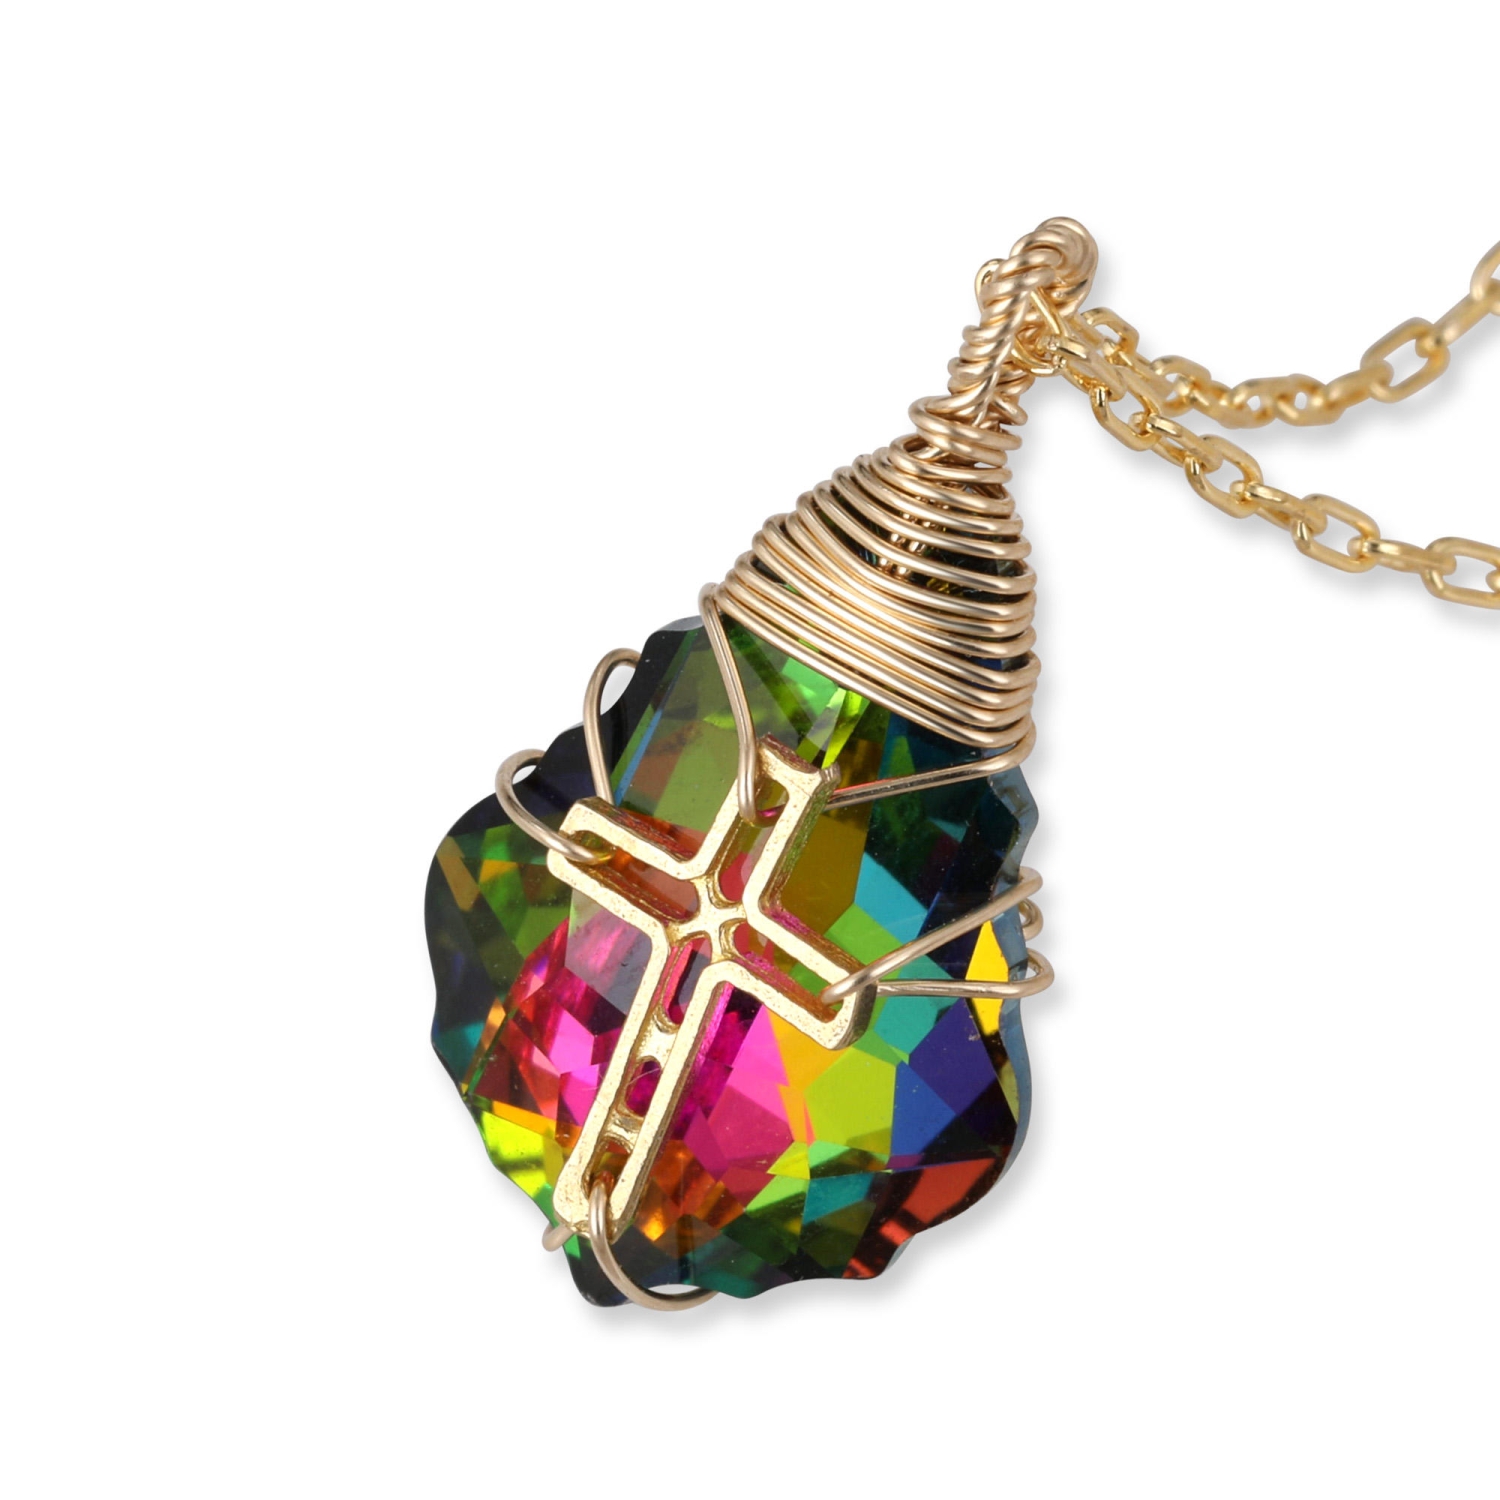 Swarovski Crystal and Gold Filled Postmodern Cross Necklace (Iridescent Rainbow) - 1